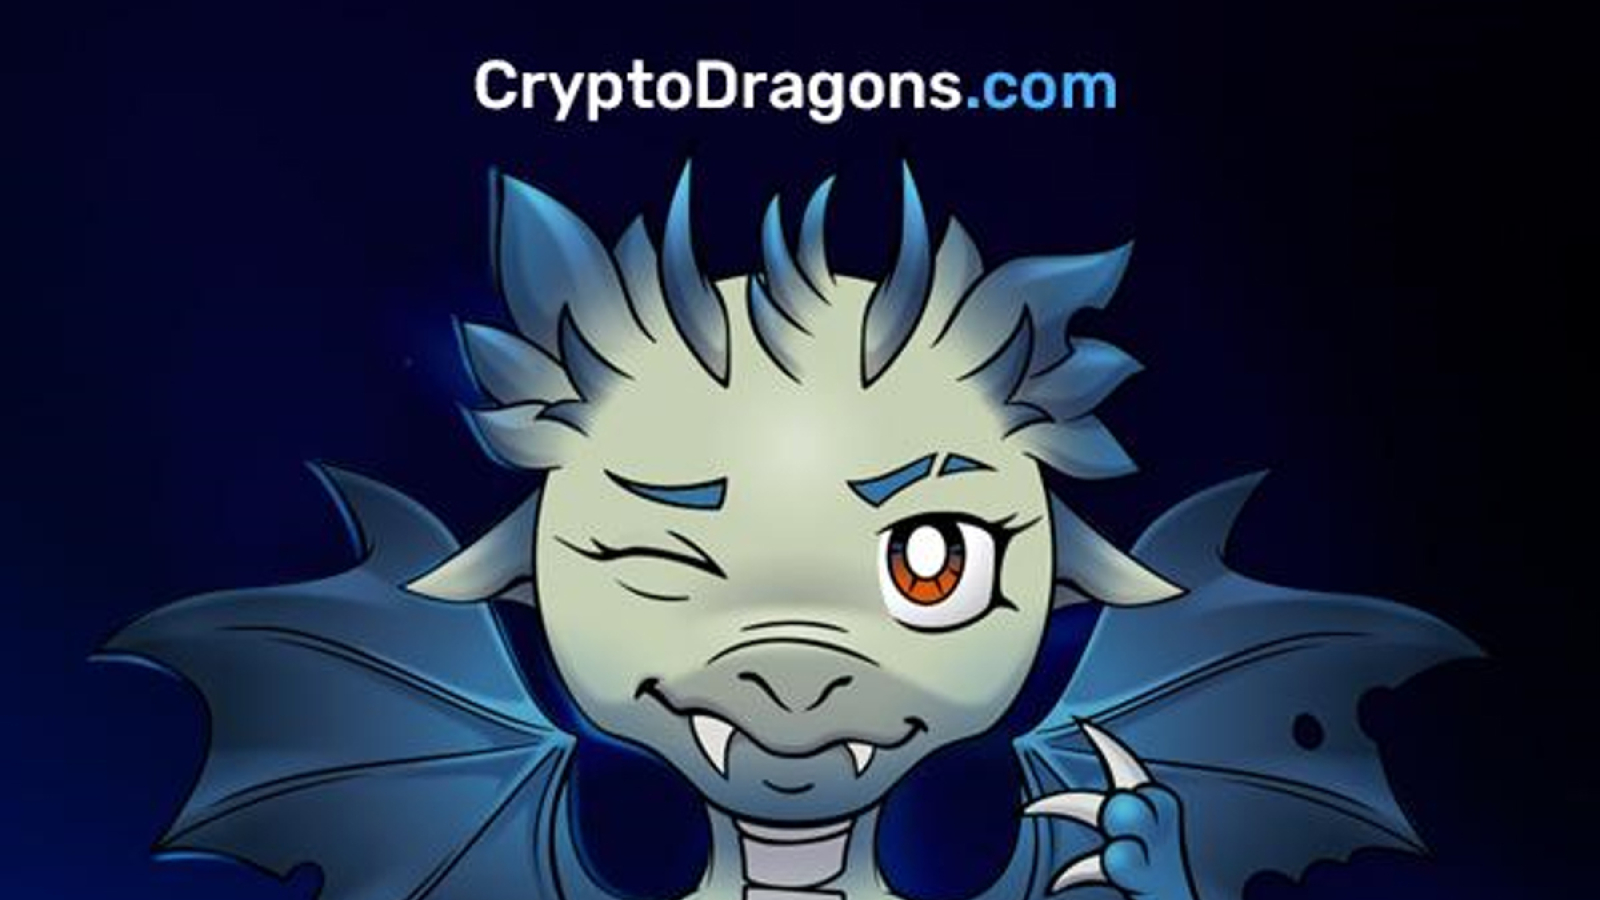 CryptoDragons: New NFT Dragons’ Metaverse has the Potential to Become a New NFT Star